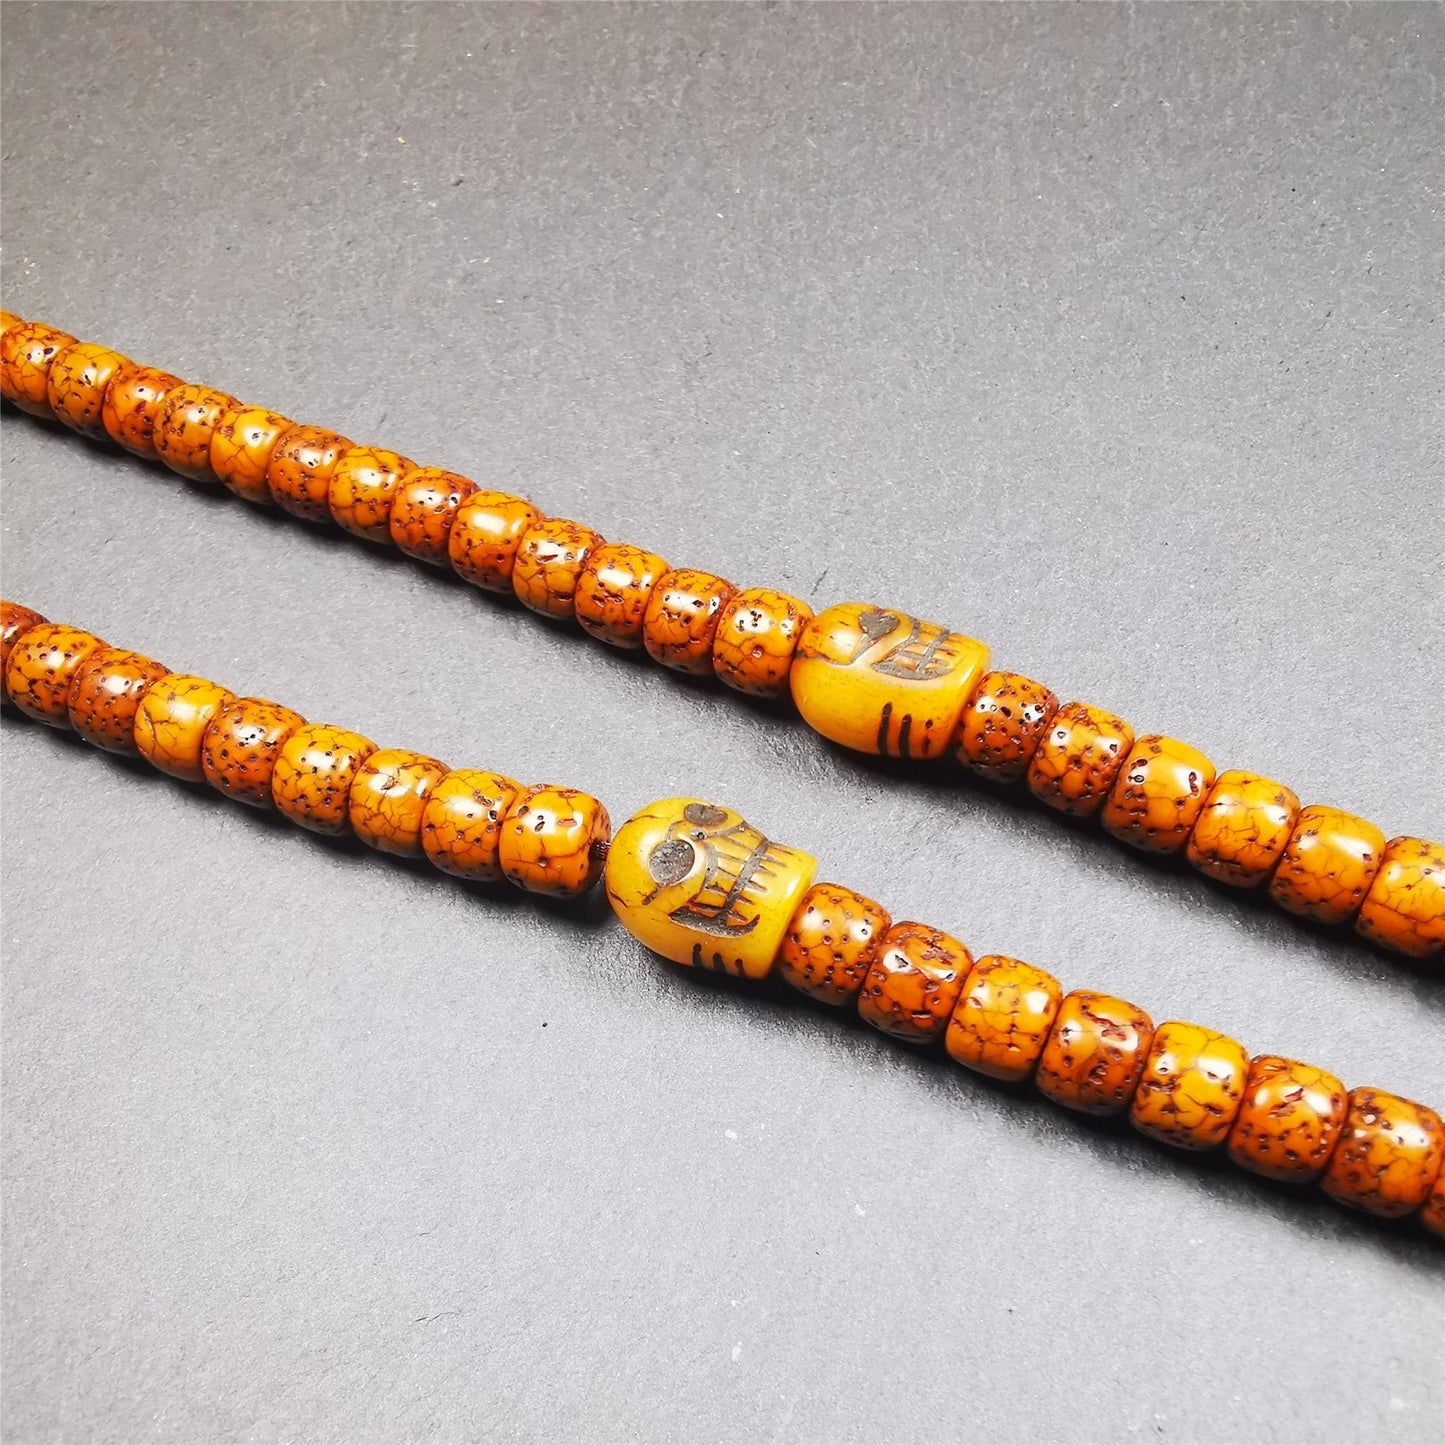 These marker beads were handmade by Tibetan craftsmen and come from Hepo Town, Baiyu County, the birthplace of the famous Tibetan handicrafts. It is made of yak bone,carved skull pattern,beige color,size is 0.4" × 0.5". Fit for 6-10mm mala (The reference in the photo is 7mm mala)